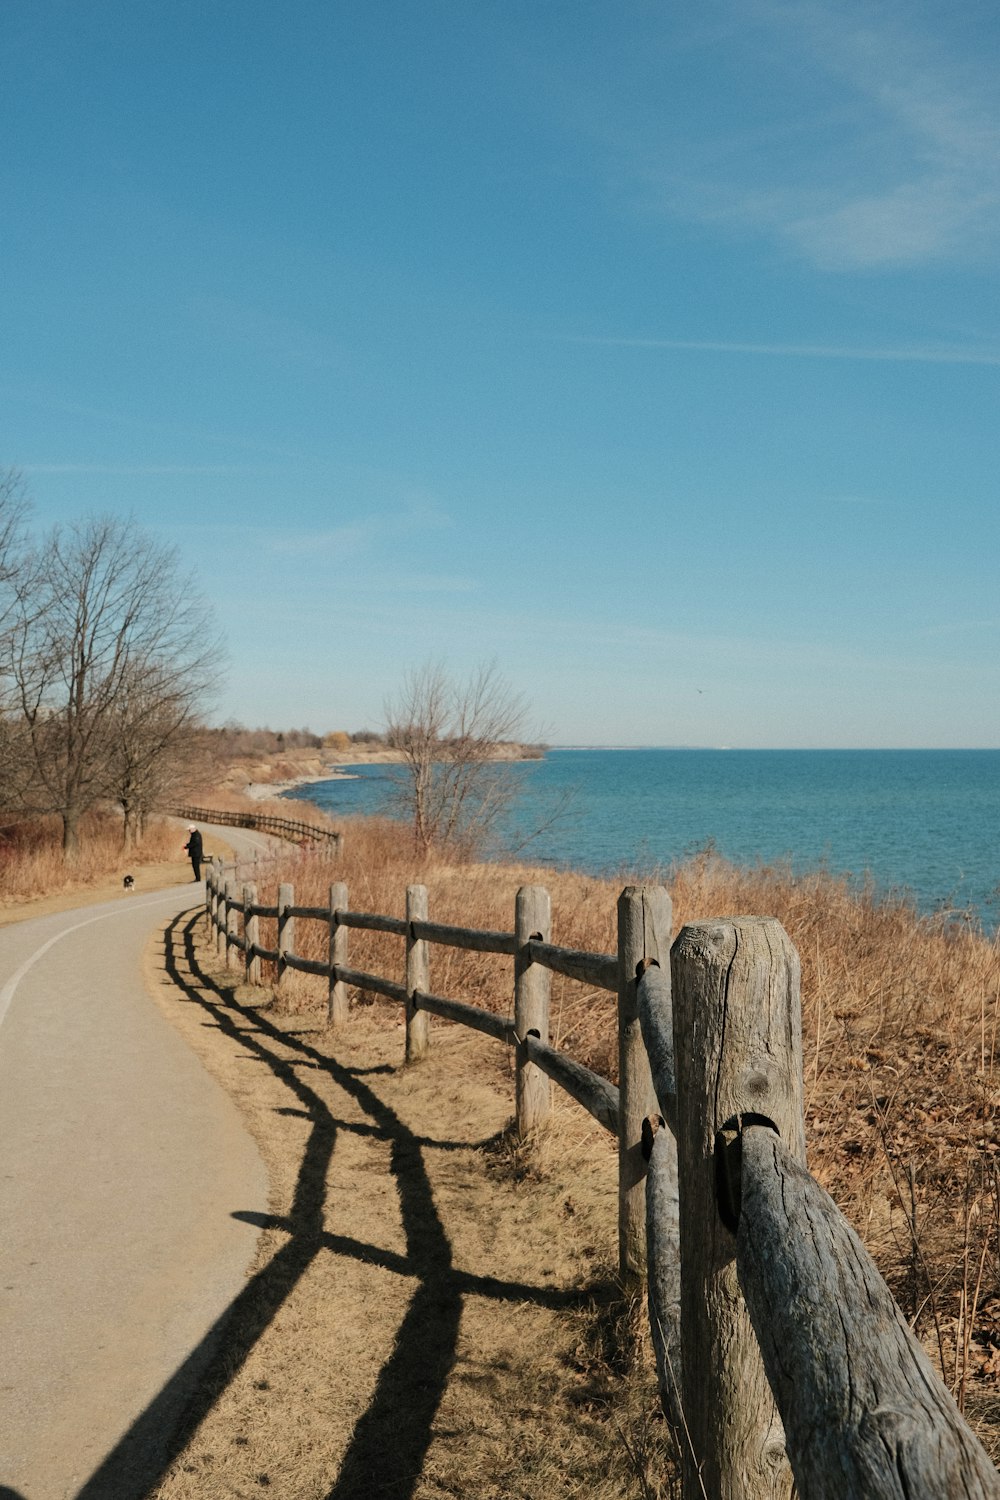 a wooden fence along the side of a road next to a body of water